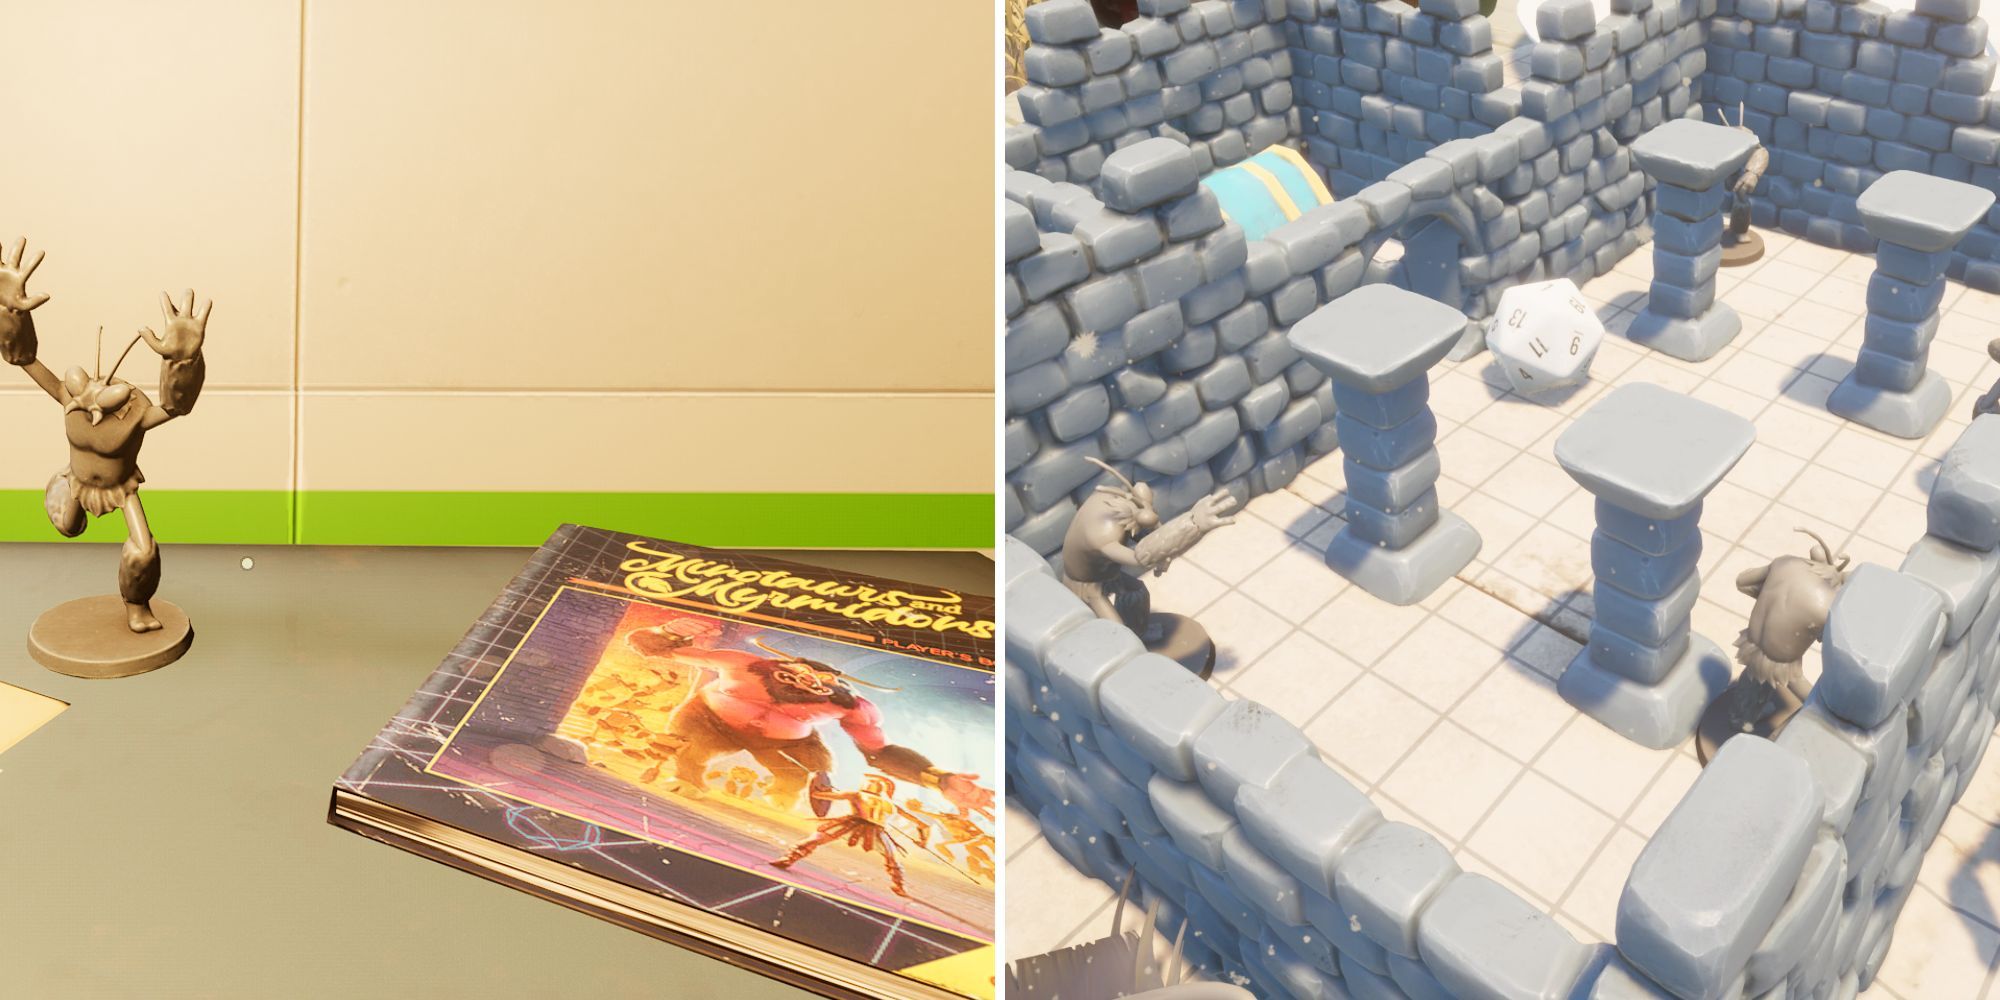 Left: A Mant playing piece and a playing book of Minotaurs and Myrmidons on a table;  Right: A Minotaur Maze board game with stone walls and pillars surrounded by a hidden treasure chest, Mant game pieces and a twenty-sided die